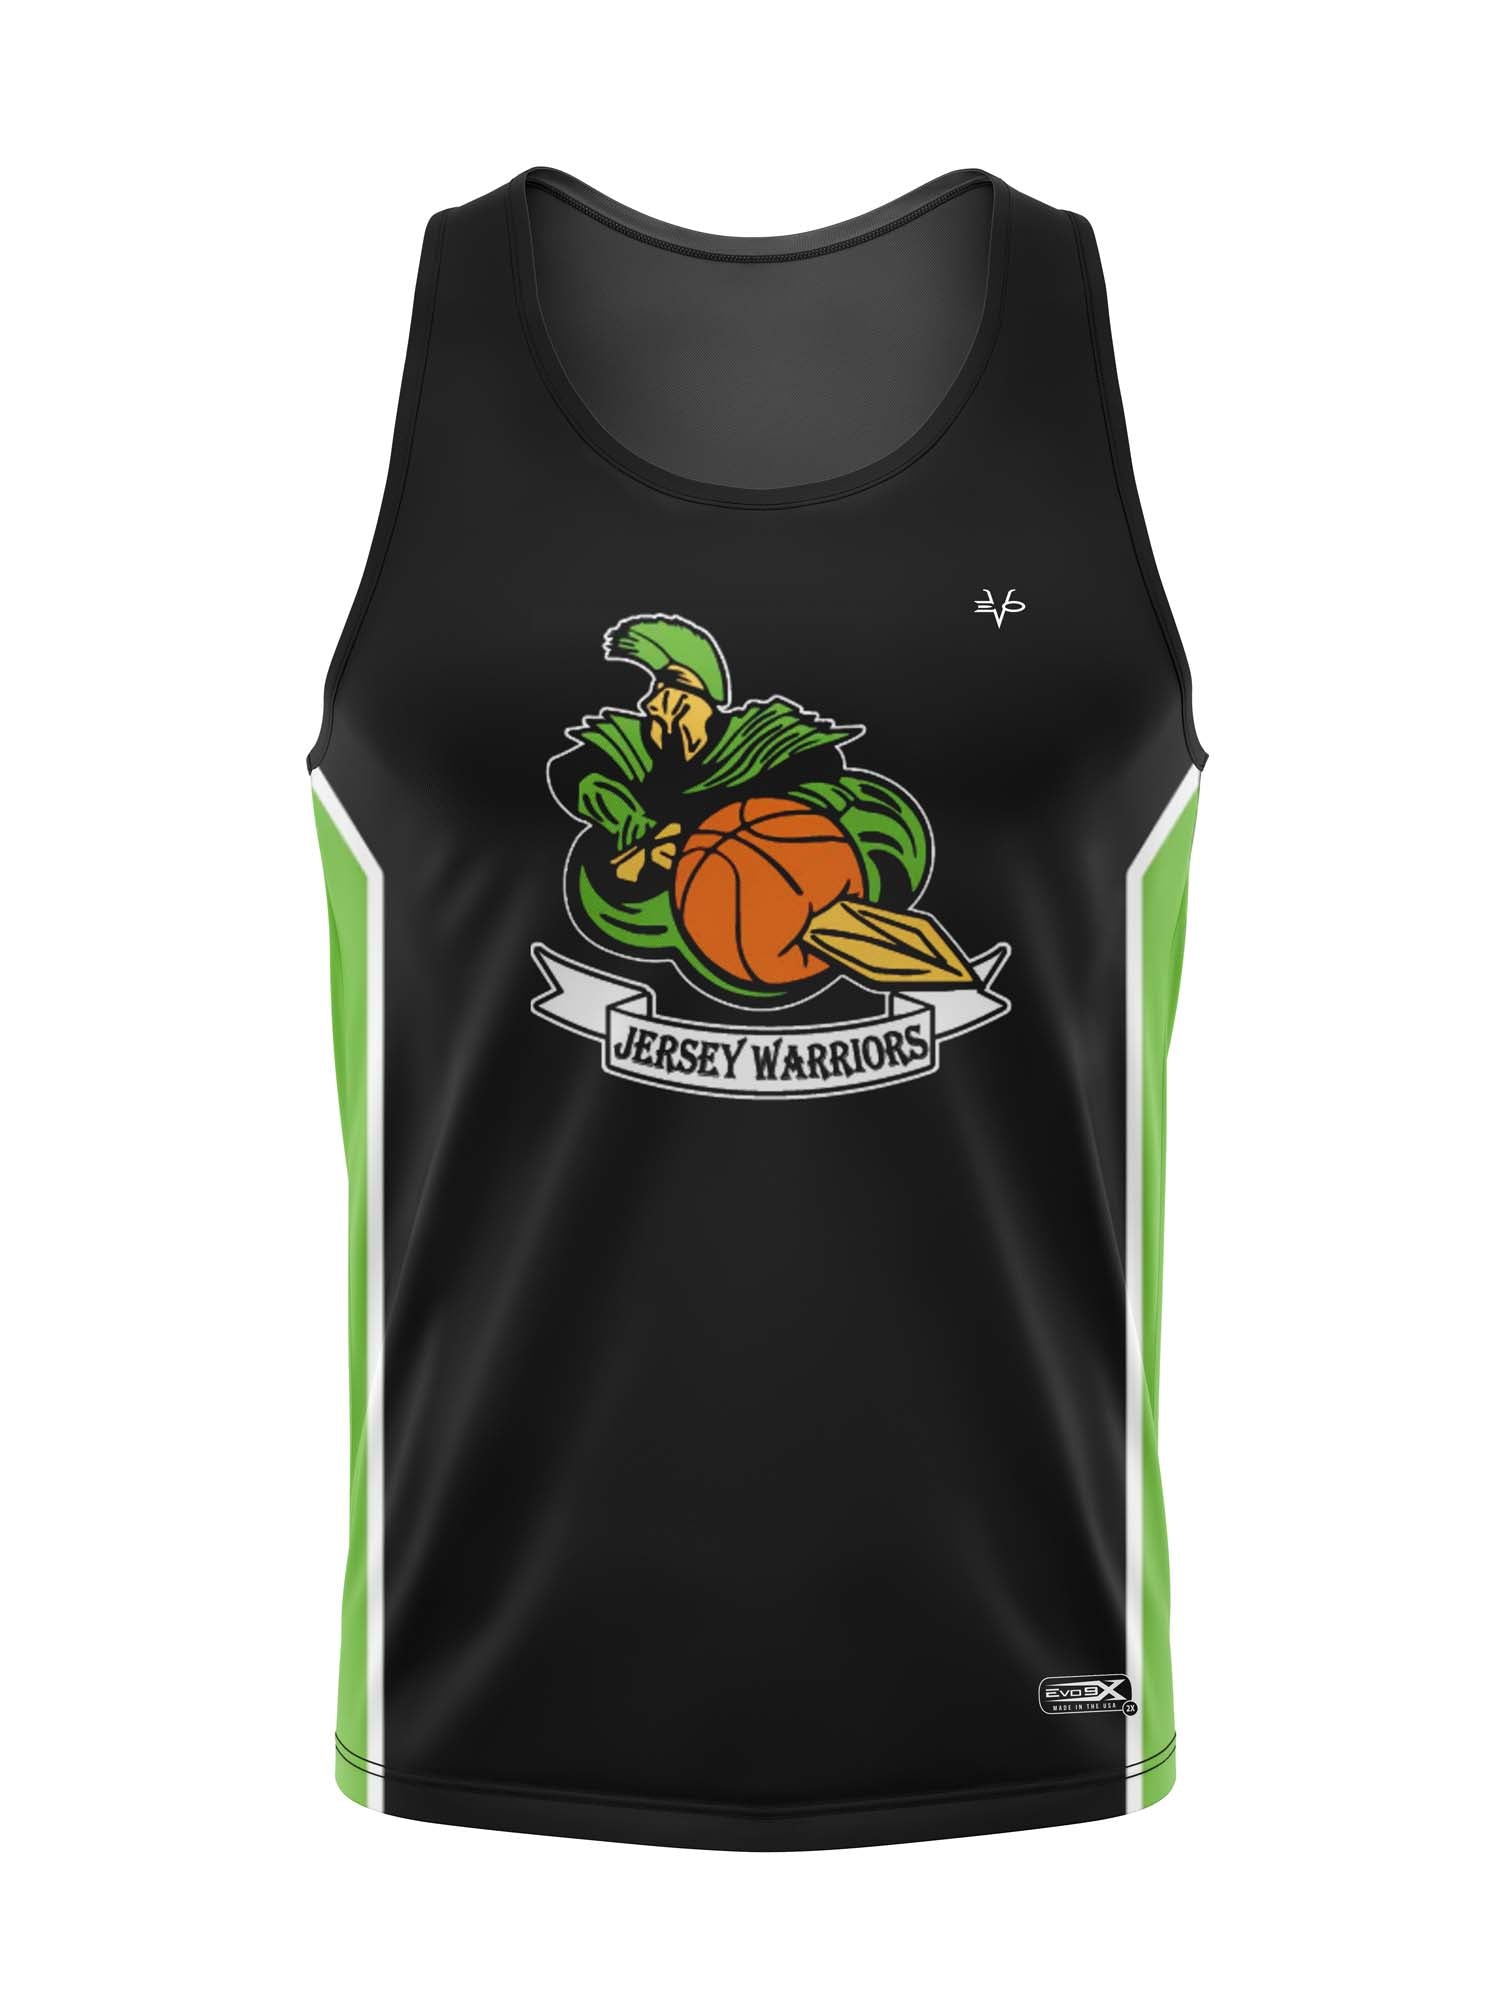 JERSEY WARRIORS Basketball Sublimated Racerback